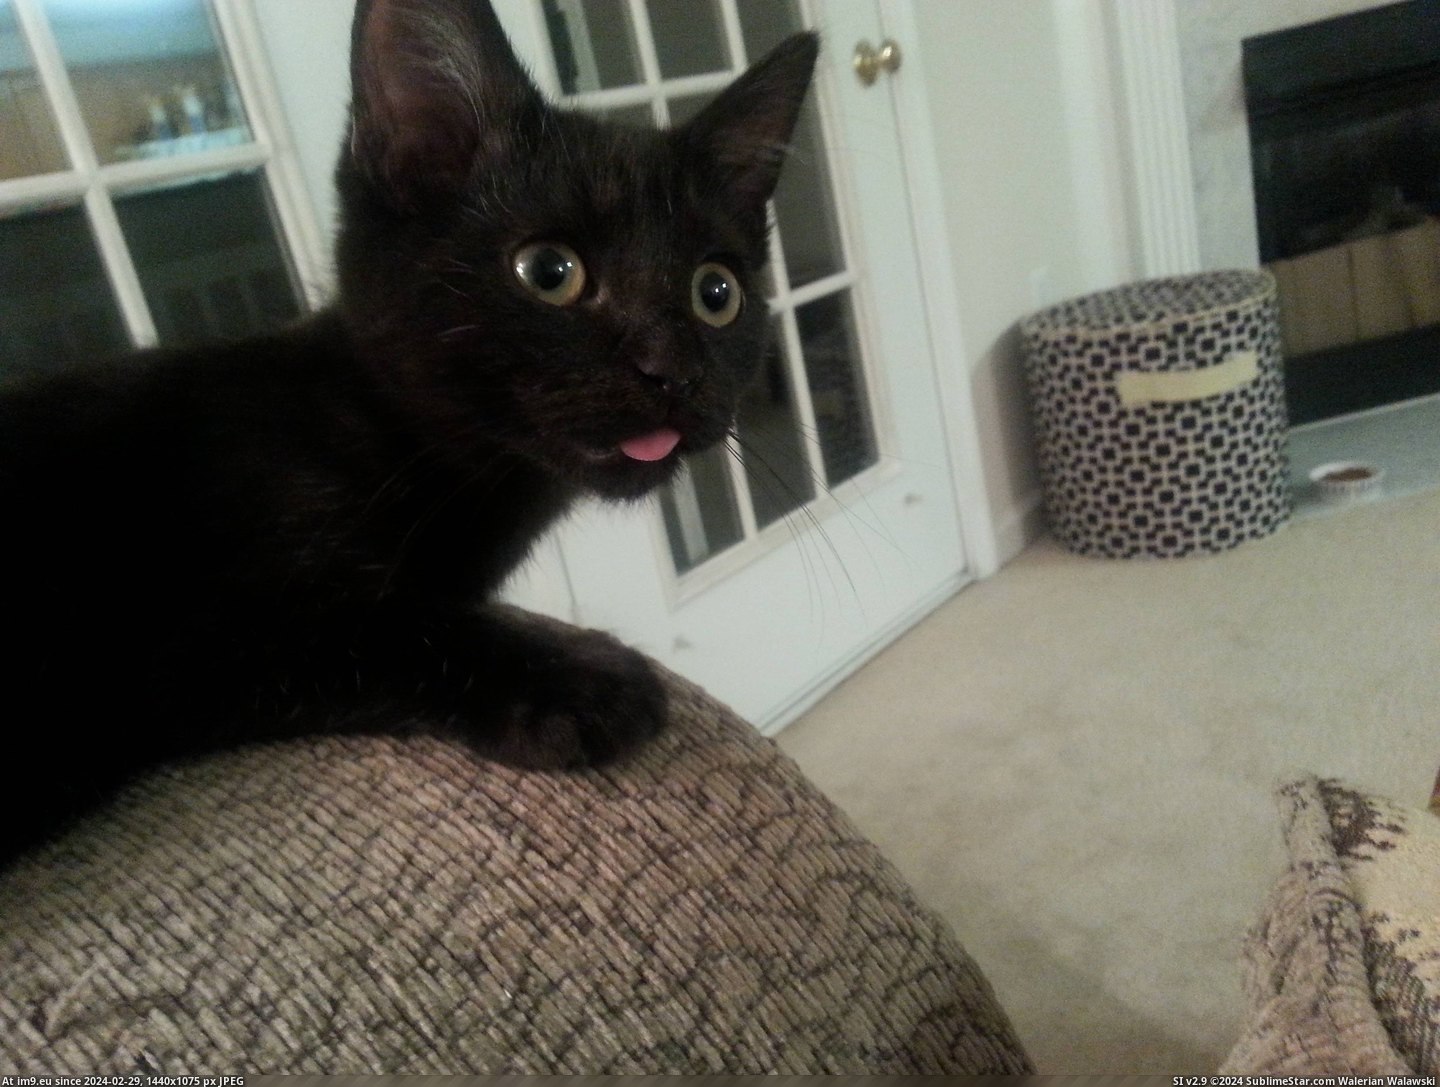 #Kitten #Tongue #Complete #Did [Aww] My kitten did this with his tongue and now I am complete. Pic. (Изображение из альбом My r/AWW favs))